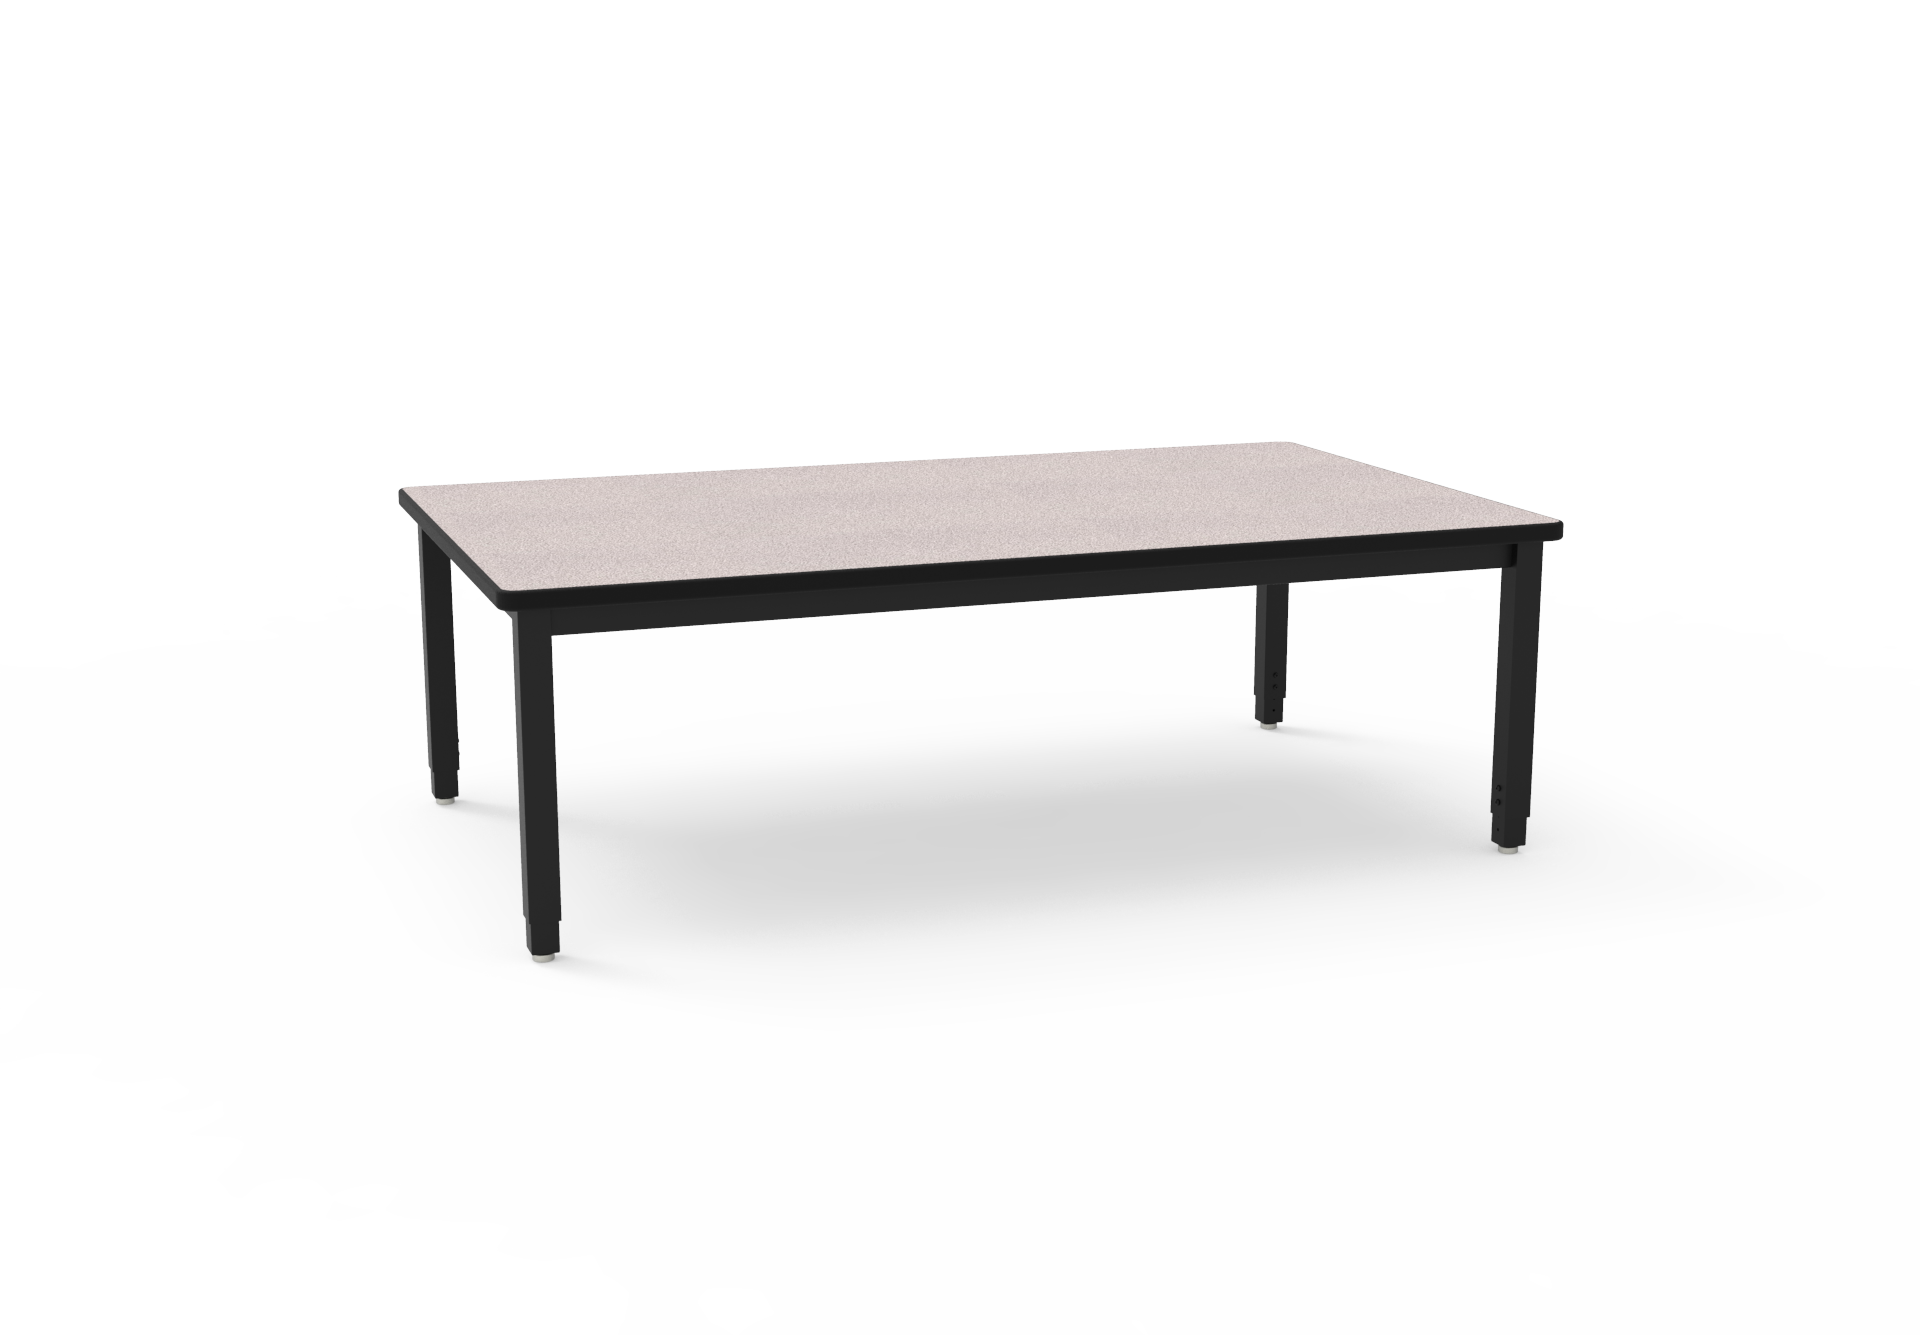 Picture of Lobo Tables LOB7109-ABP-25 4 8 in. x 7 2 in. Fully Welded Lobo Table- Black Frame and Adjustable Big Paw Legs- Grey Nebula Laminate with Lotz Armor Edge Top